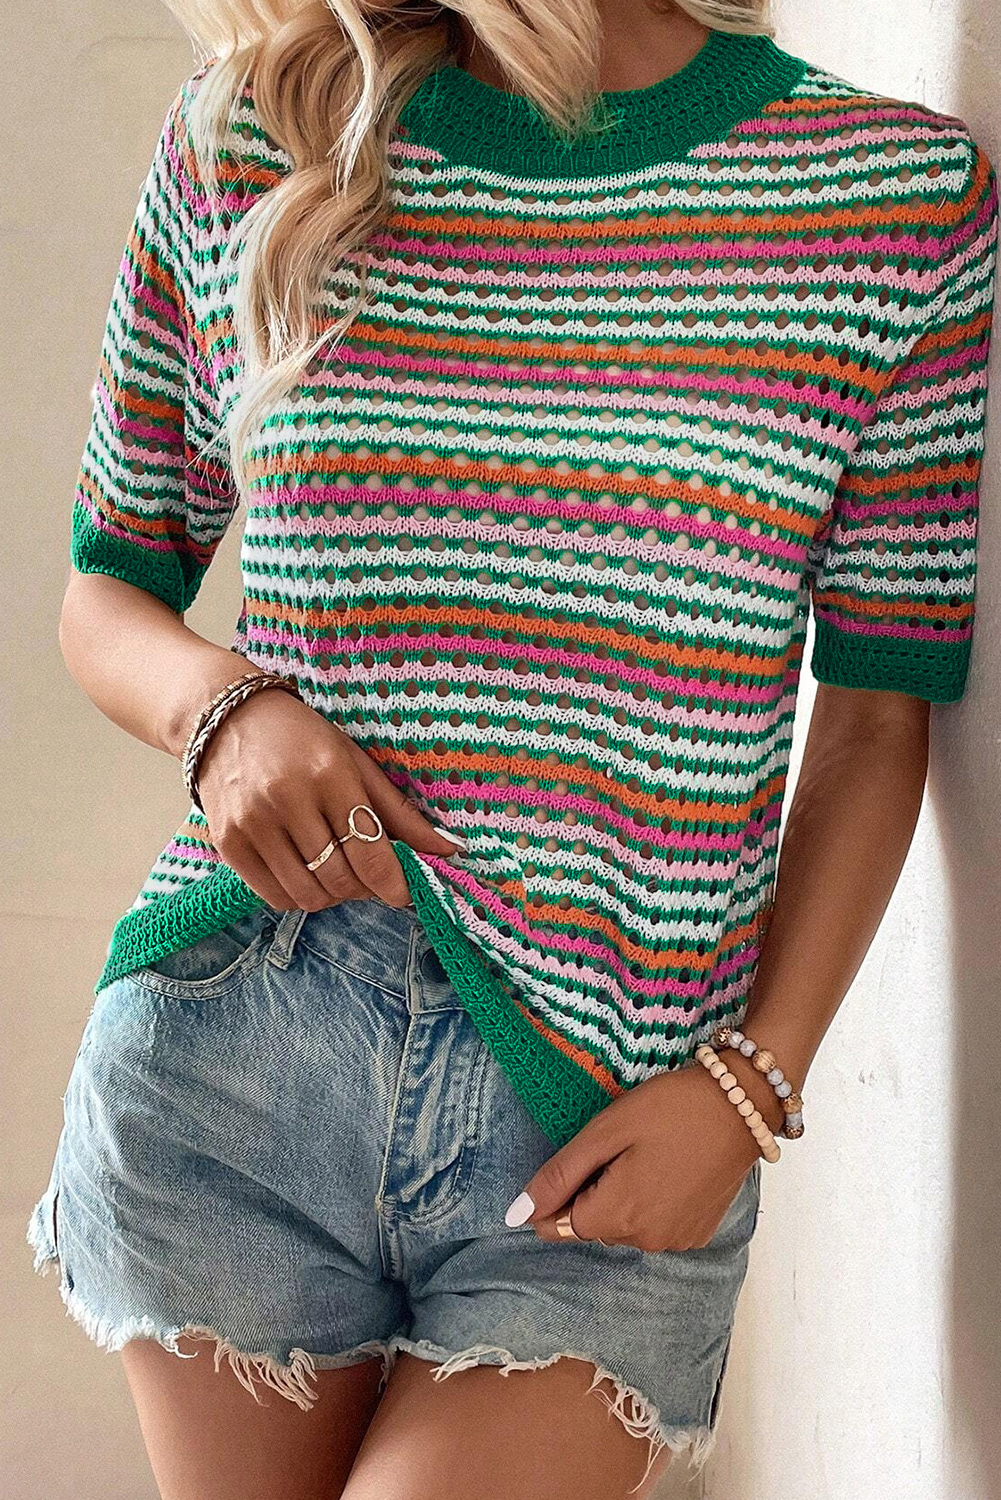 Shewin Wholesale Customized Dark Green Striped Pattern Hollow Out Contrast Trim Knit T SHIRT